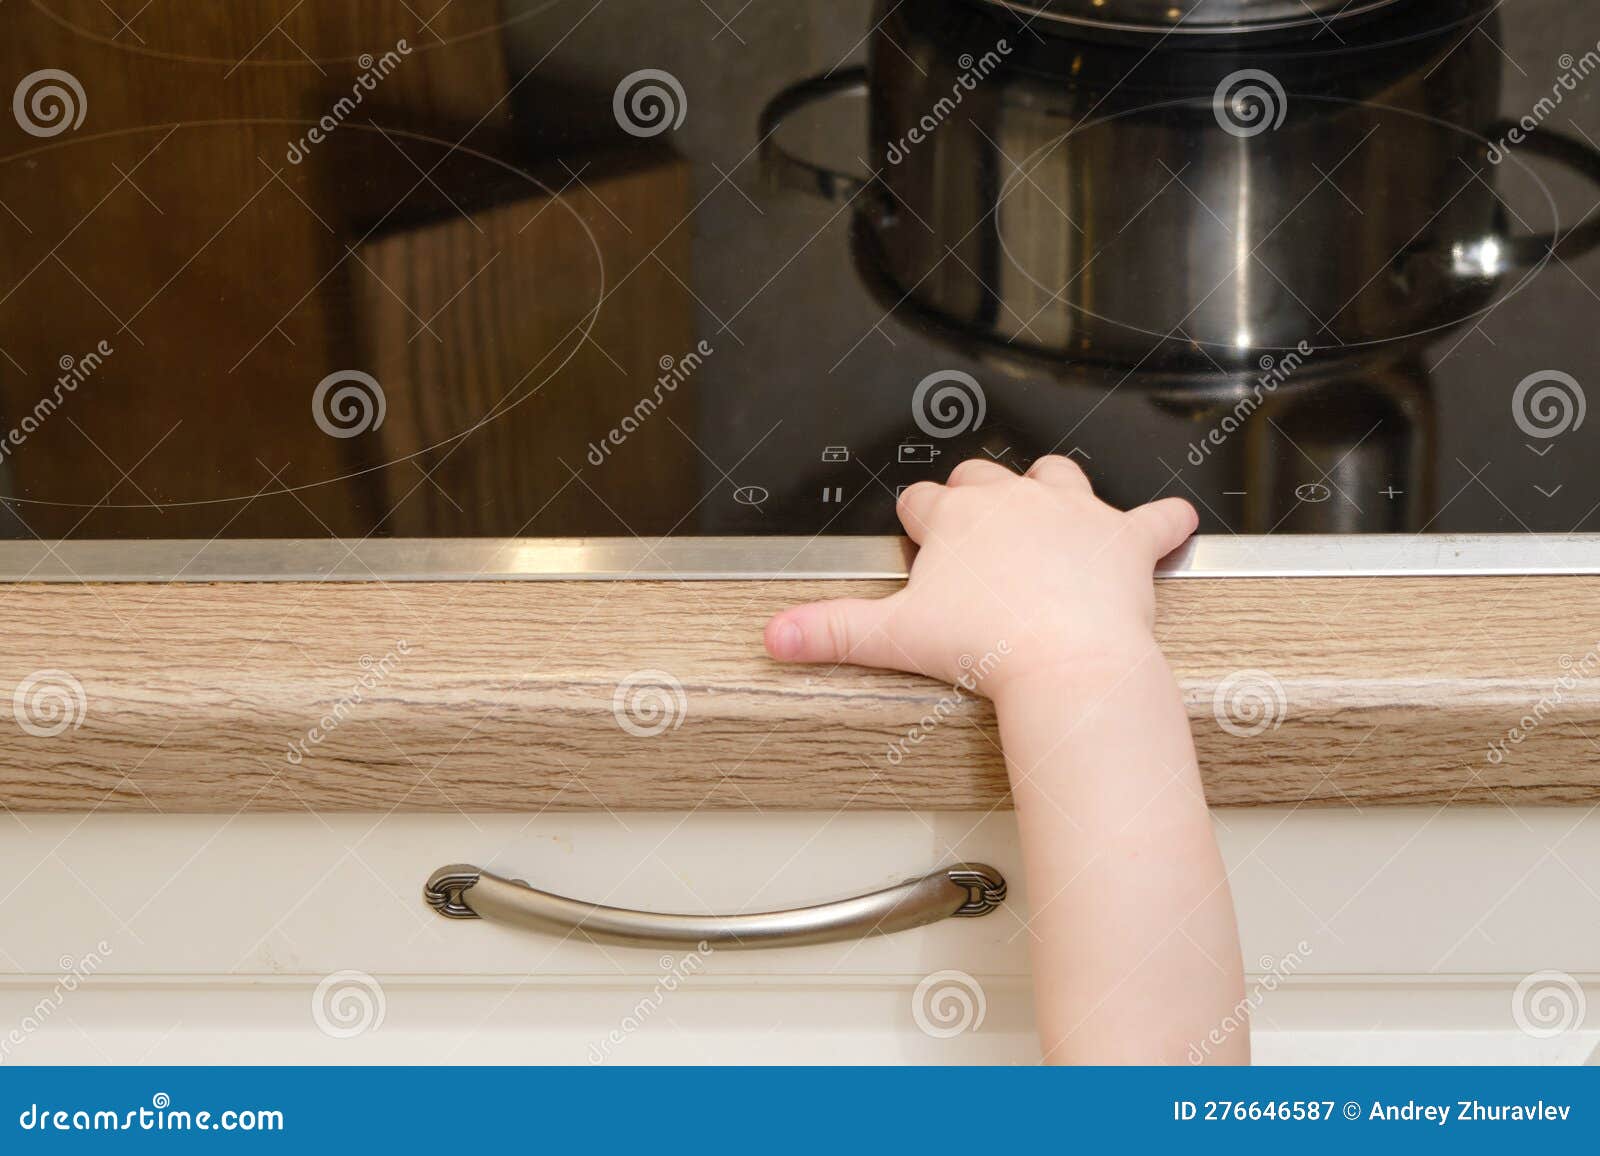 https://thumbs.dreamstime.com/z/toddler-baby-climbs-hot-electric-stove-home-kitchen-small-child-touches-surface-stove-his-hand-276646587.jpg